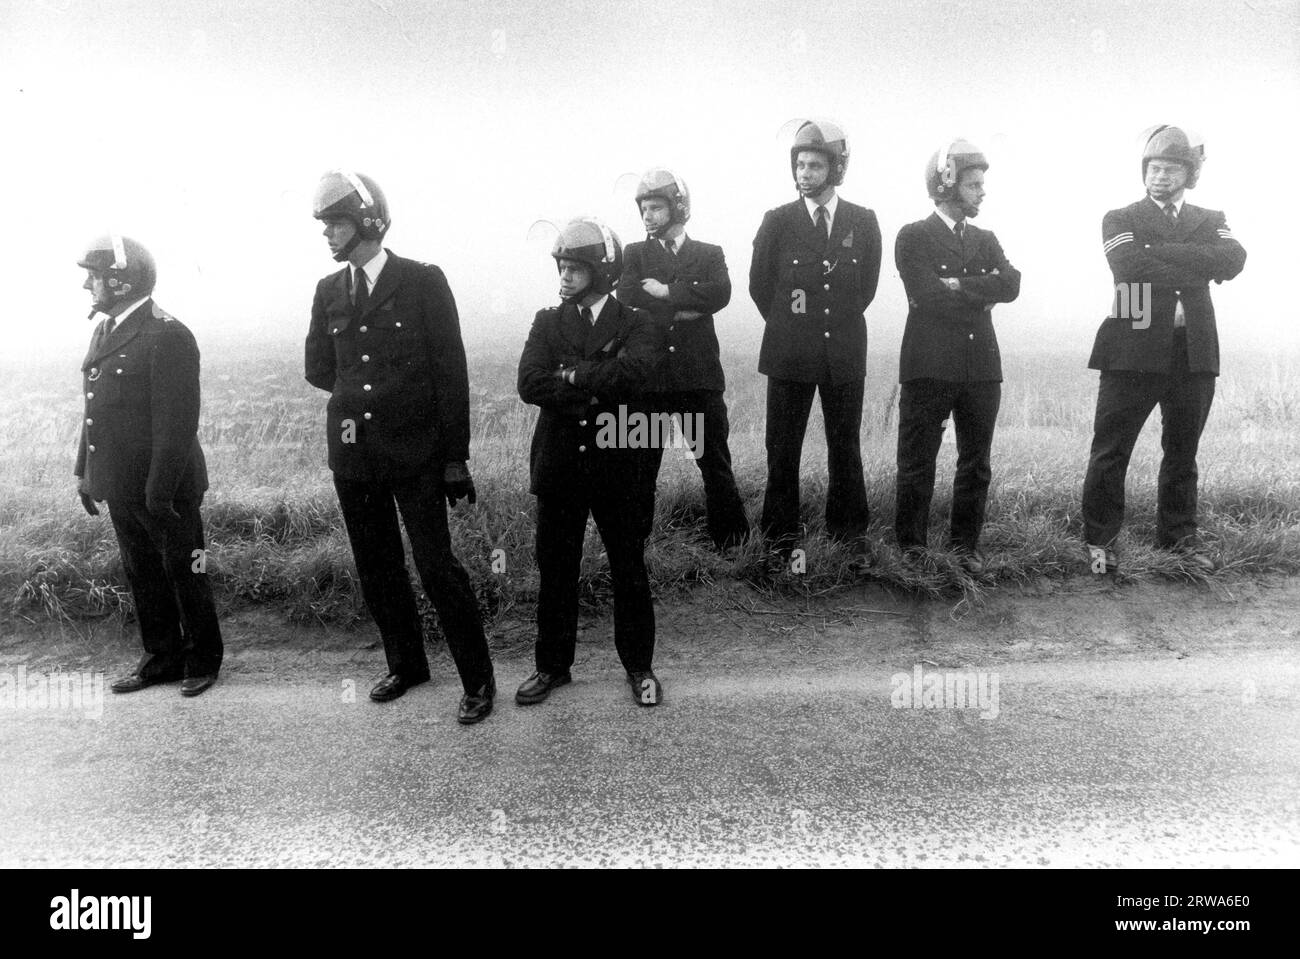 Police reinforcements during the Miners Strike 1984 at Gascoigne Wood drift mine, Yorkshire, England. The police are waiting for the so called Scabs - working coal miners to arrive by coach and be bused into work through a picket line of striking coal miners who are on strike. 1980s UK HOMER SYKES Stock Photo